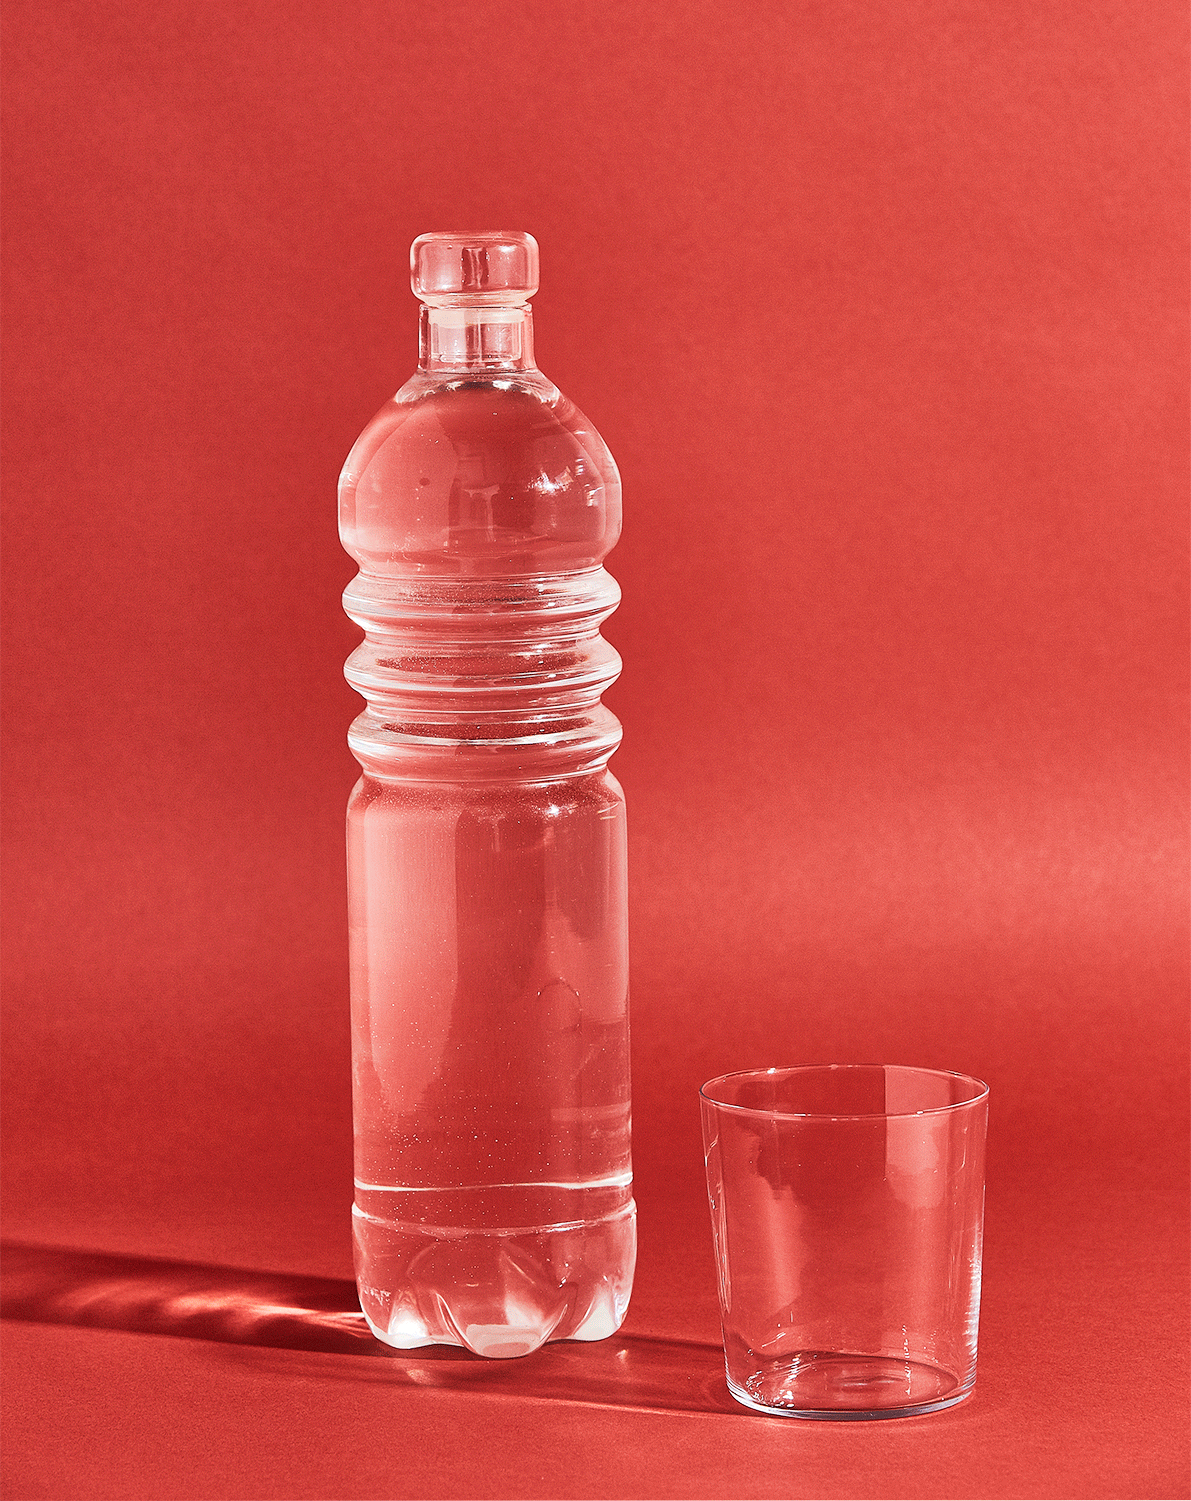 Whoa: This Is What Happens to Your Body When You Drink Enough Water